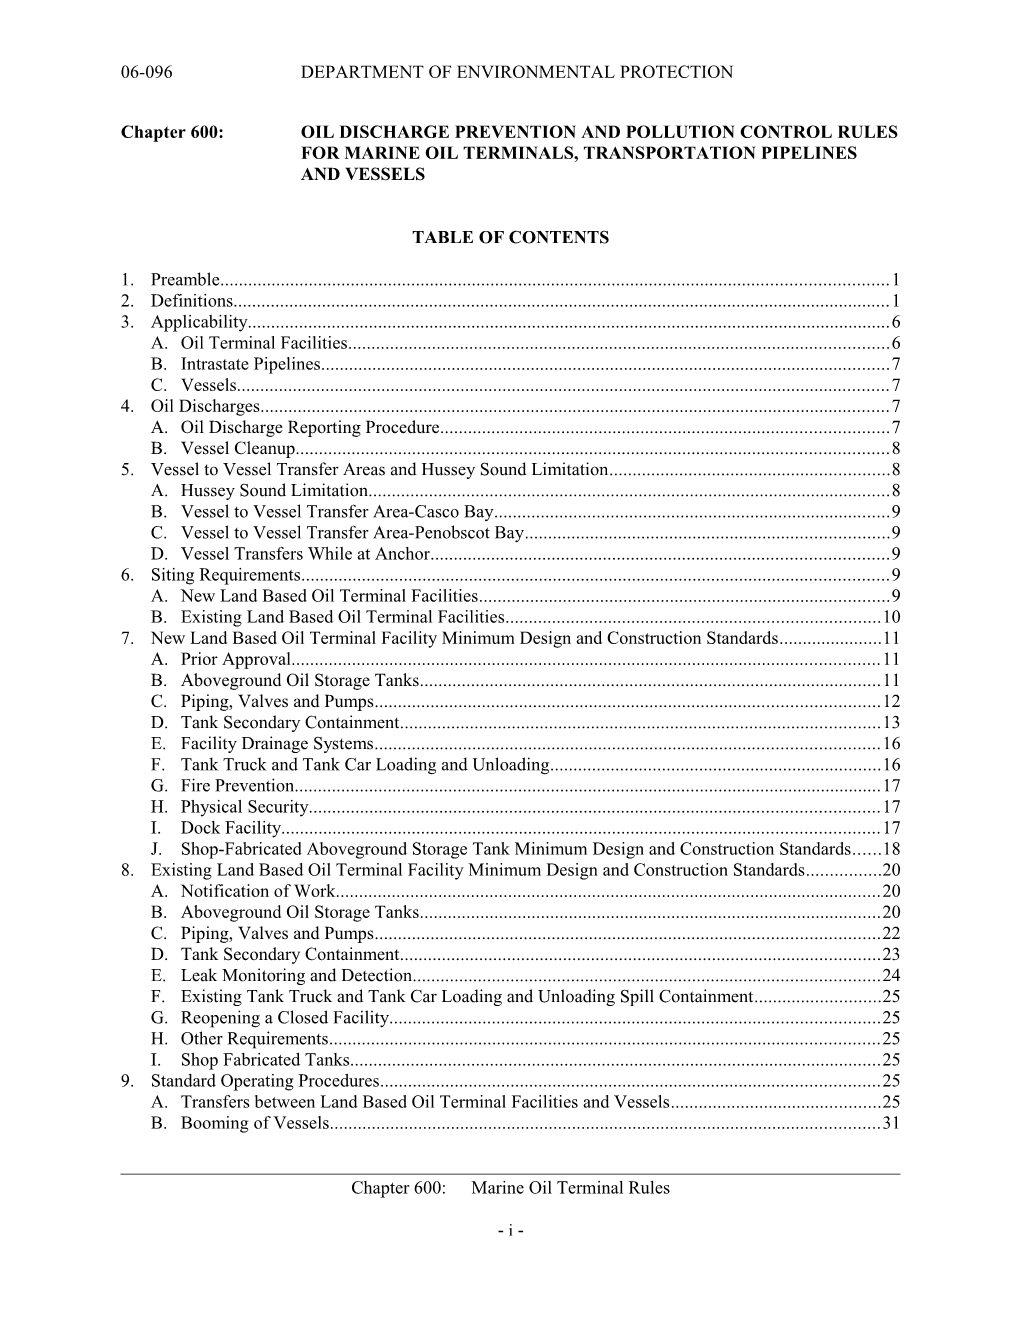 Table of Contents s16